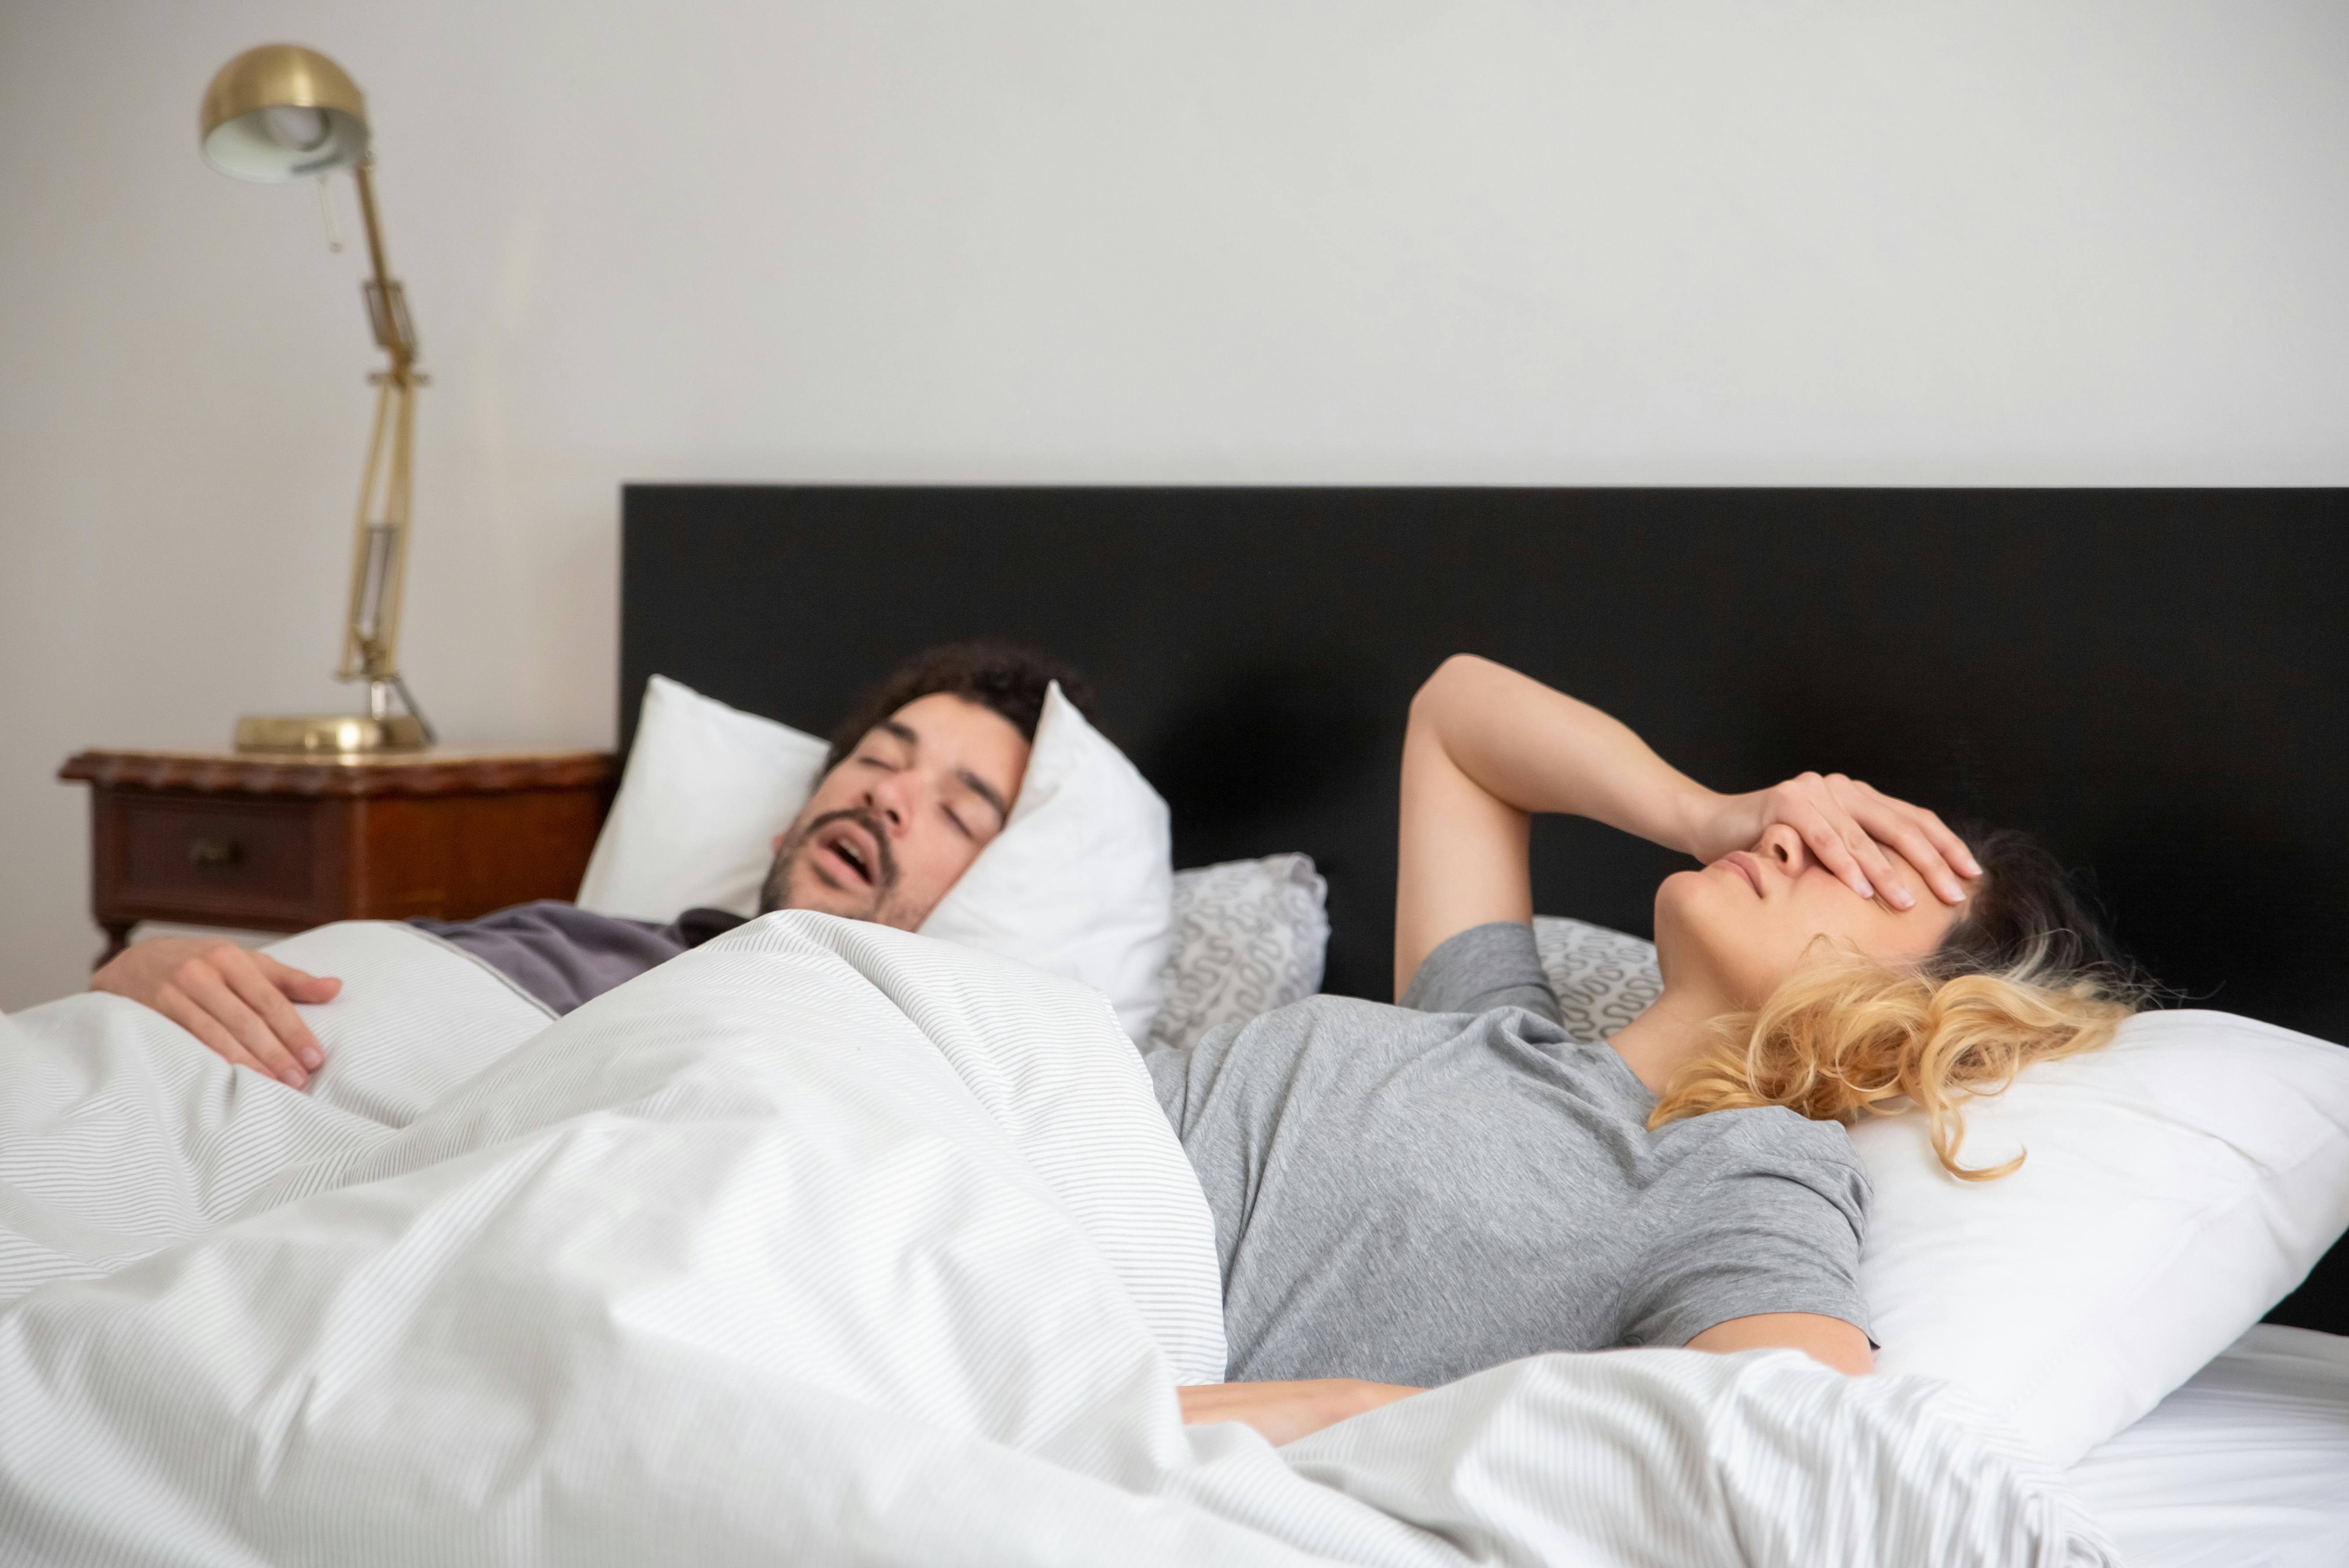 Is Snoring a Permanent Concern?